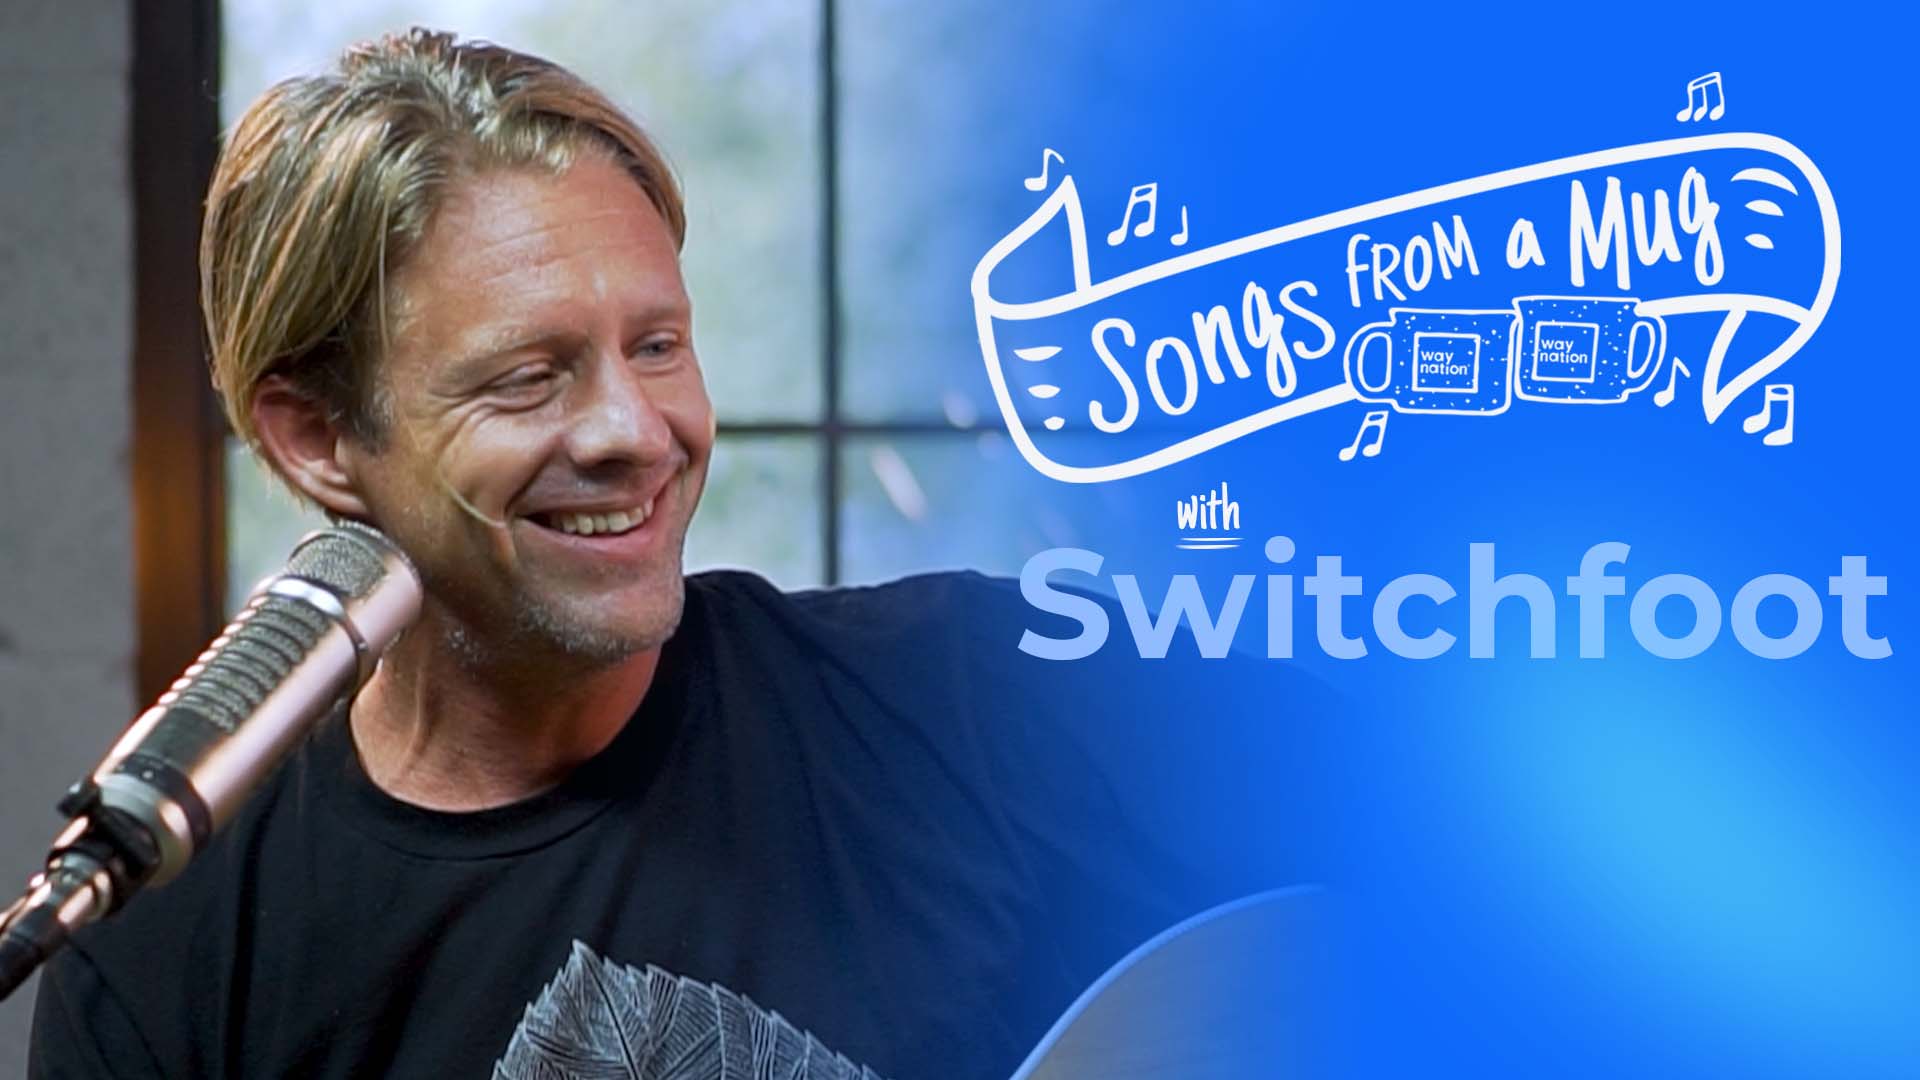 Switchfoot Songs From a Mug